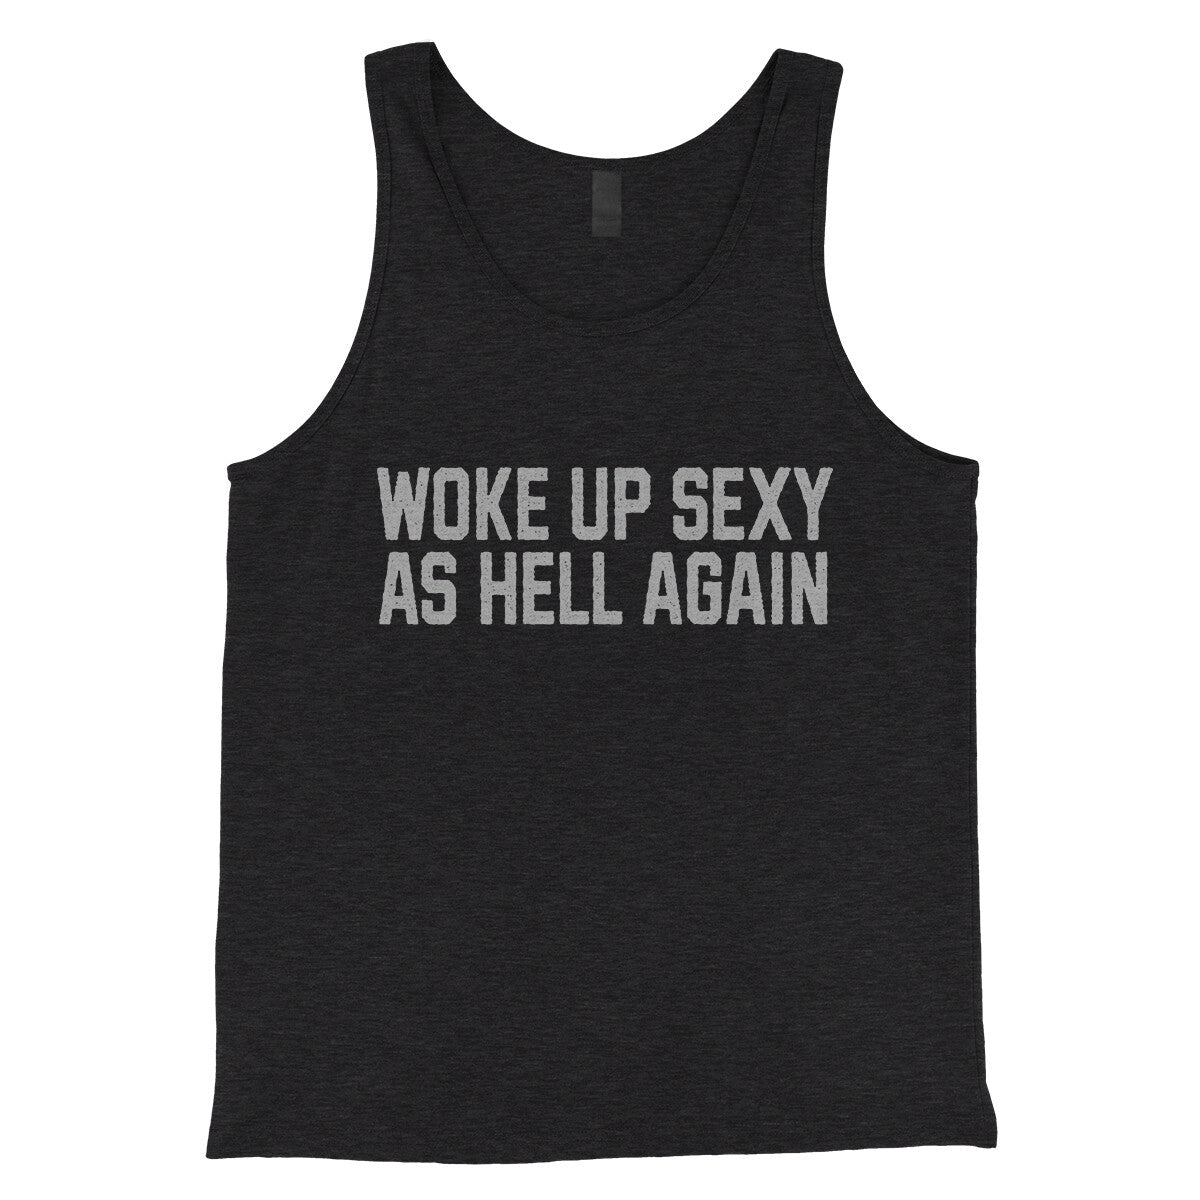 Woke Up Sexy as Hell in Charcoal Black TriBlend Color